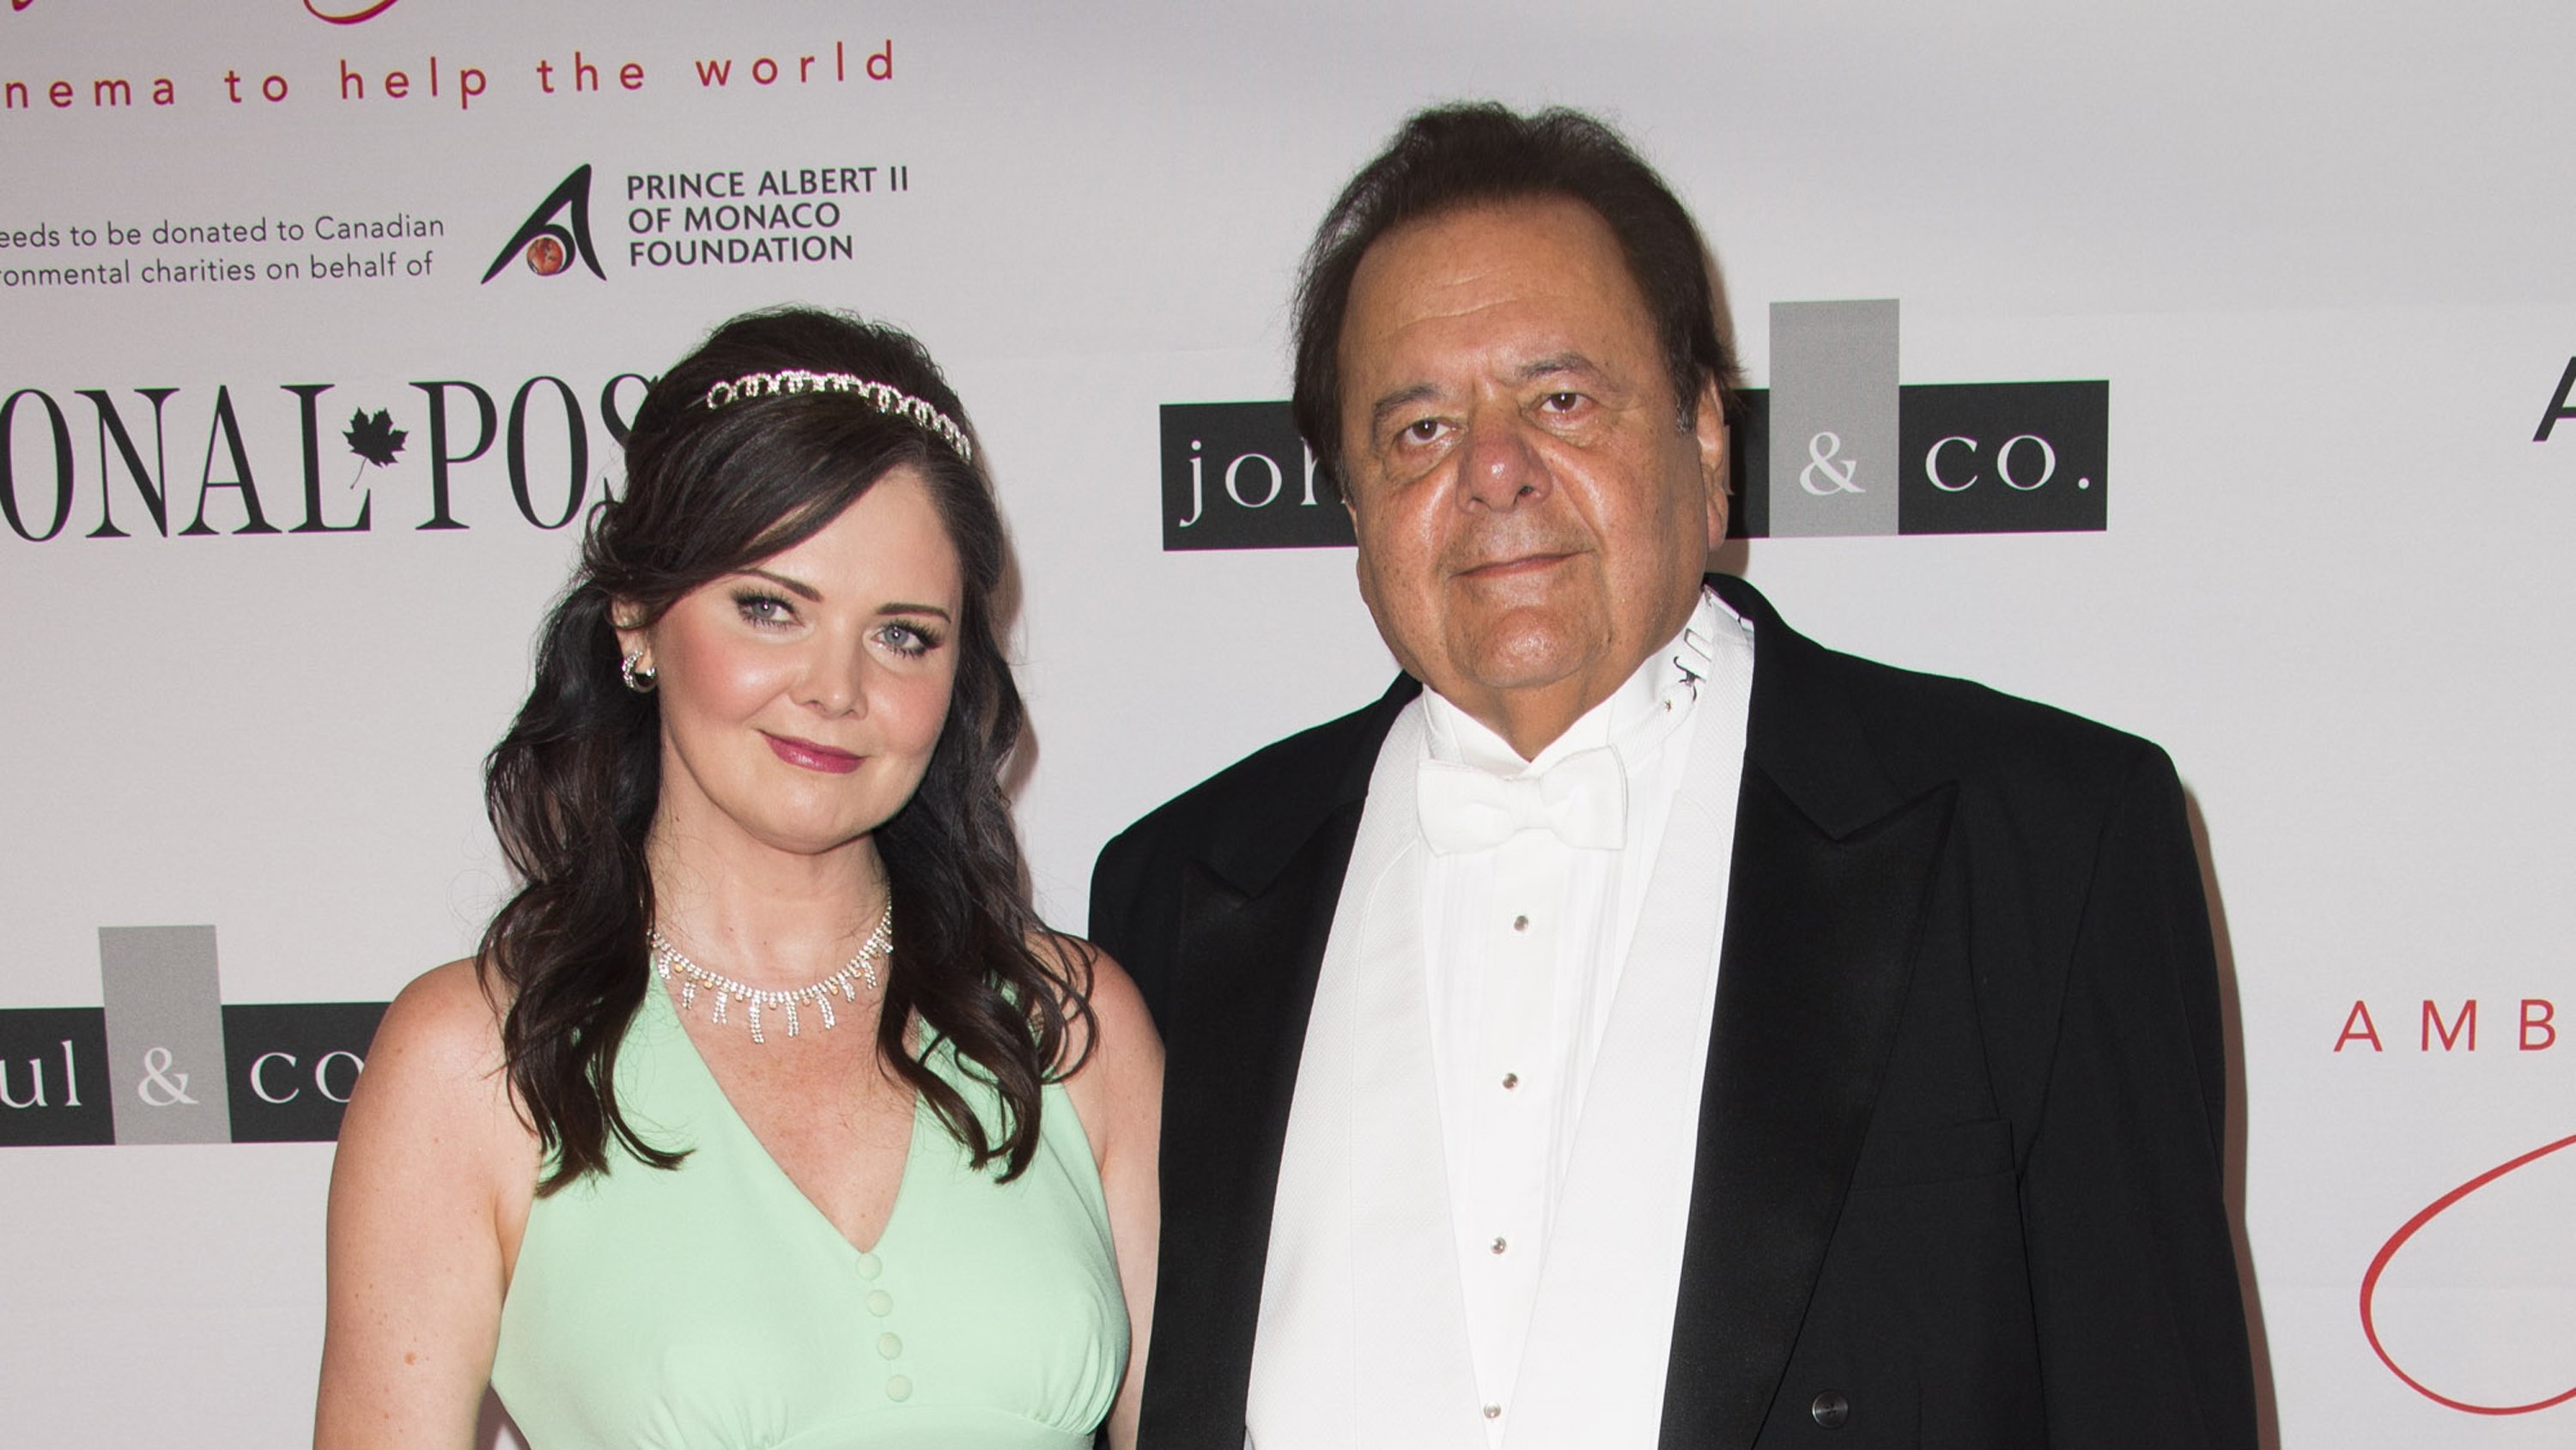 Paul Sorvino (R) and his wife Dee Dee Sorvino attend the AMBI Gala benefiting The Prince Albert II of Monaco Foundation in Toronto, Canada, Sept. 9, 2015. (AP)